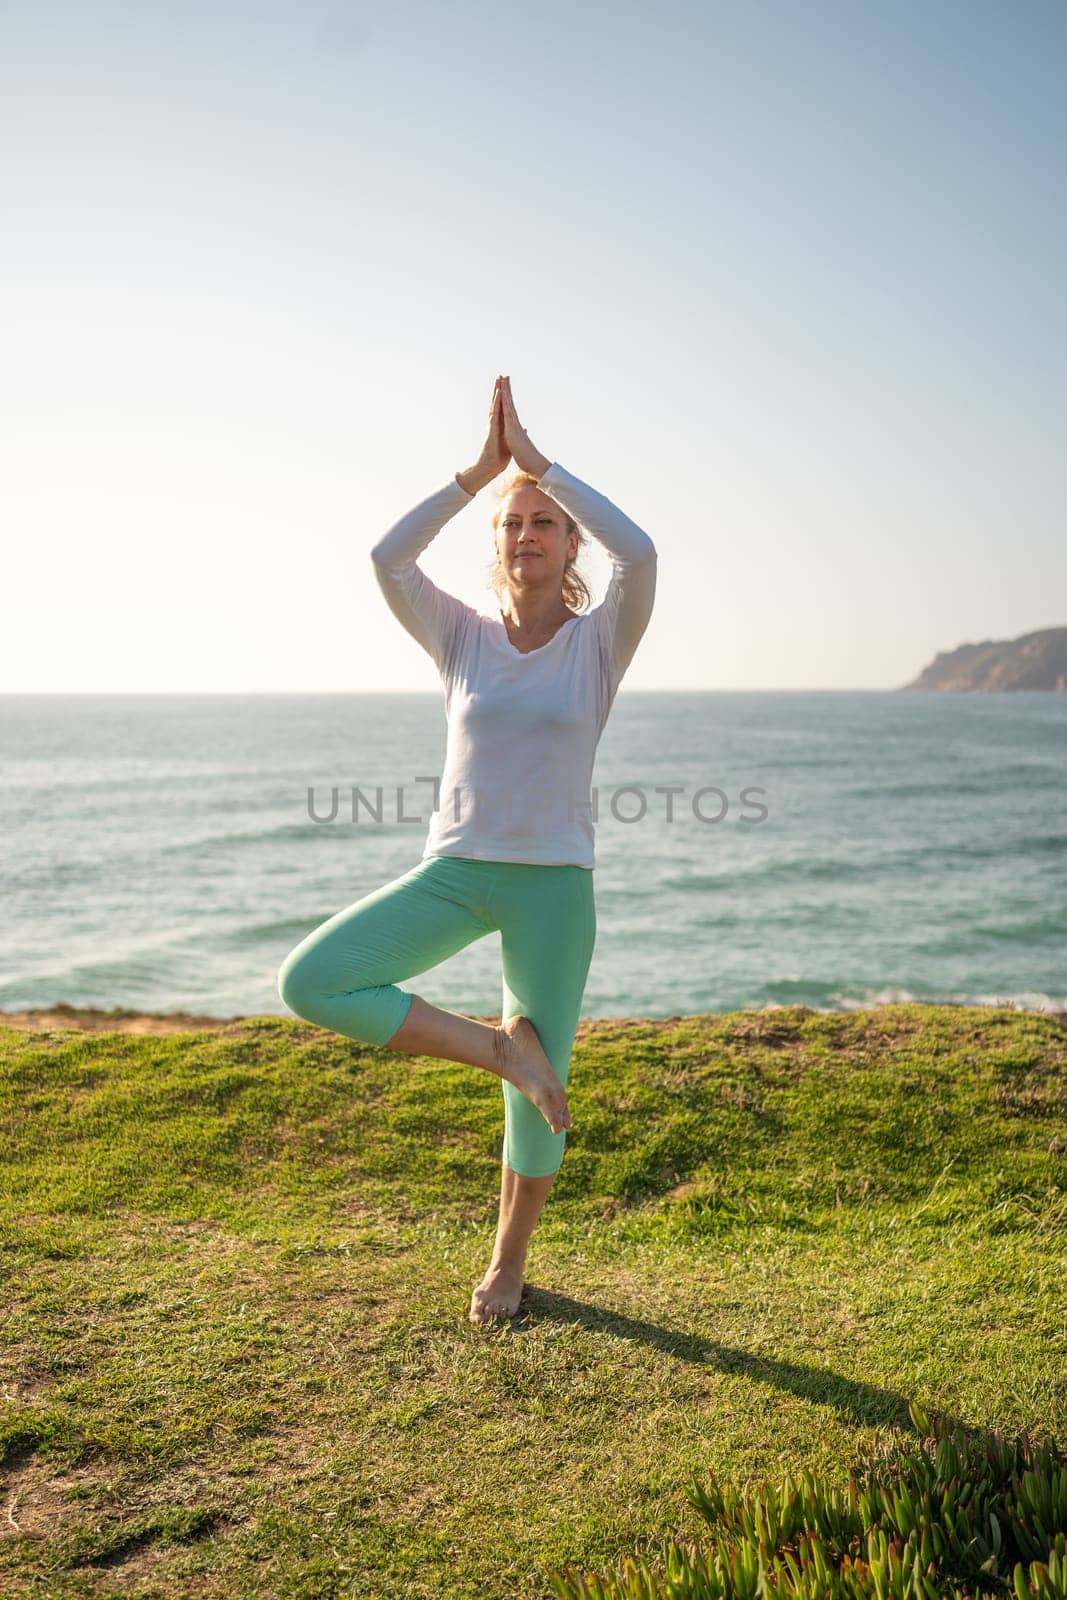 Mature woman practicing yoga on beach, standing in tree pose (Vrikshasana) enjoying beautiful ocean view. Fitness activity great way to stay healthy and active. Seniors embracing healthy lifestyle.